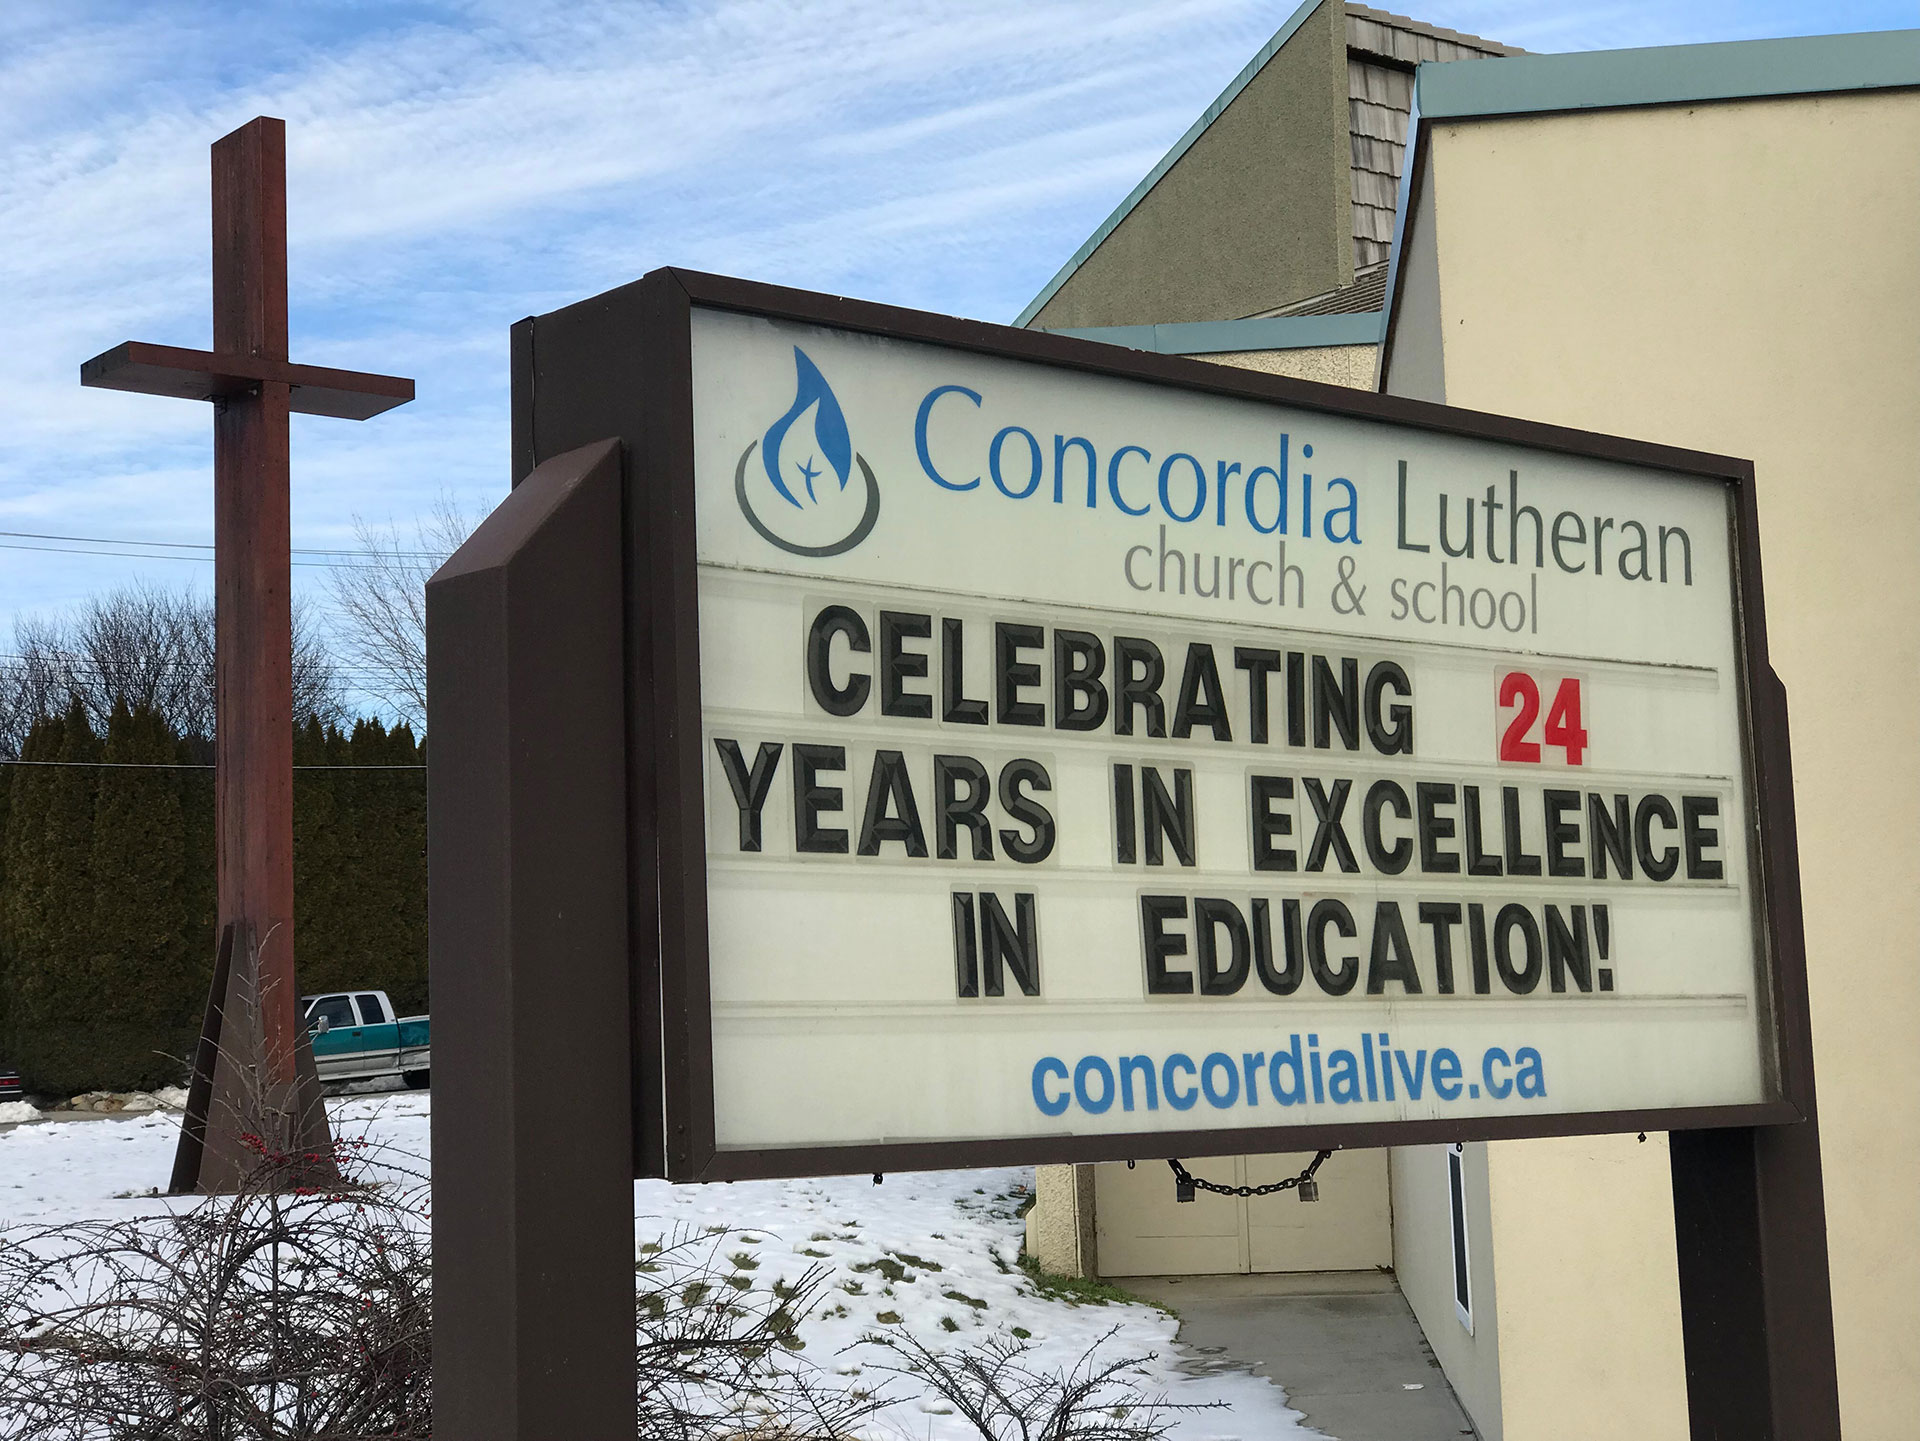 Celebrating 24 years of excellence in education